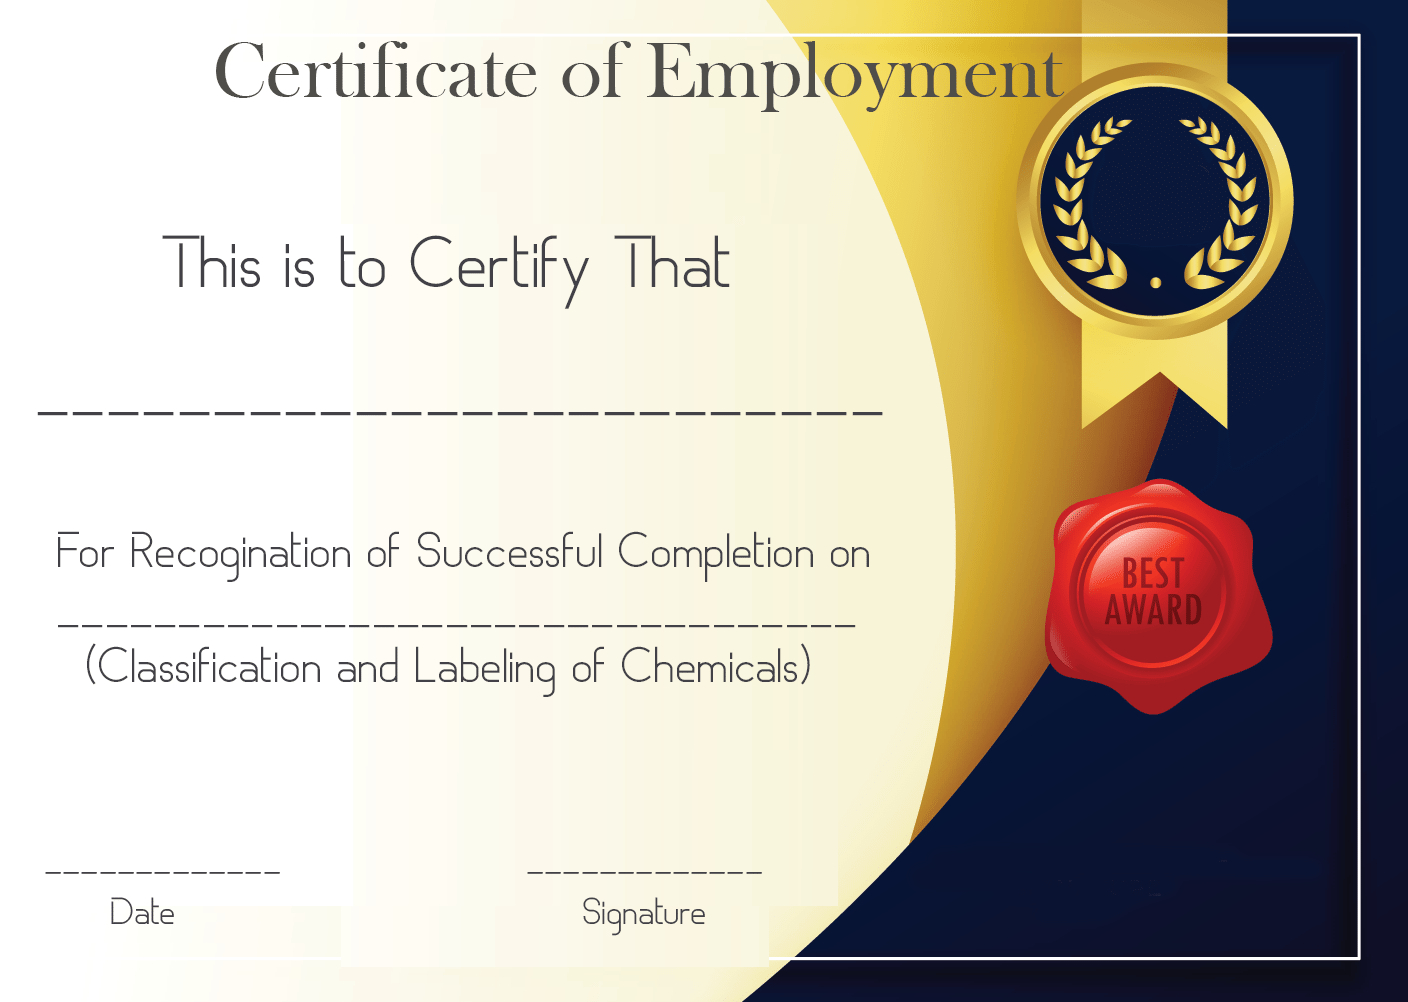 Free Sample Certificate Of Employment Template | Certificate With Regard To Best Performance Certificate Template